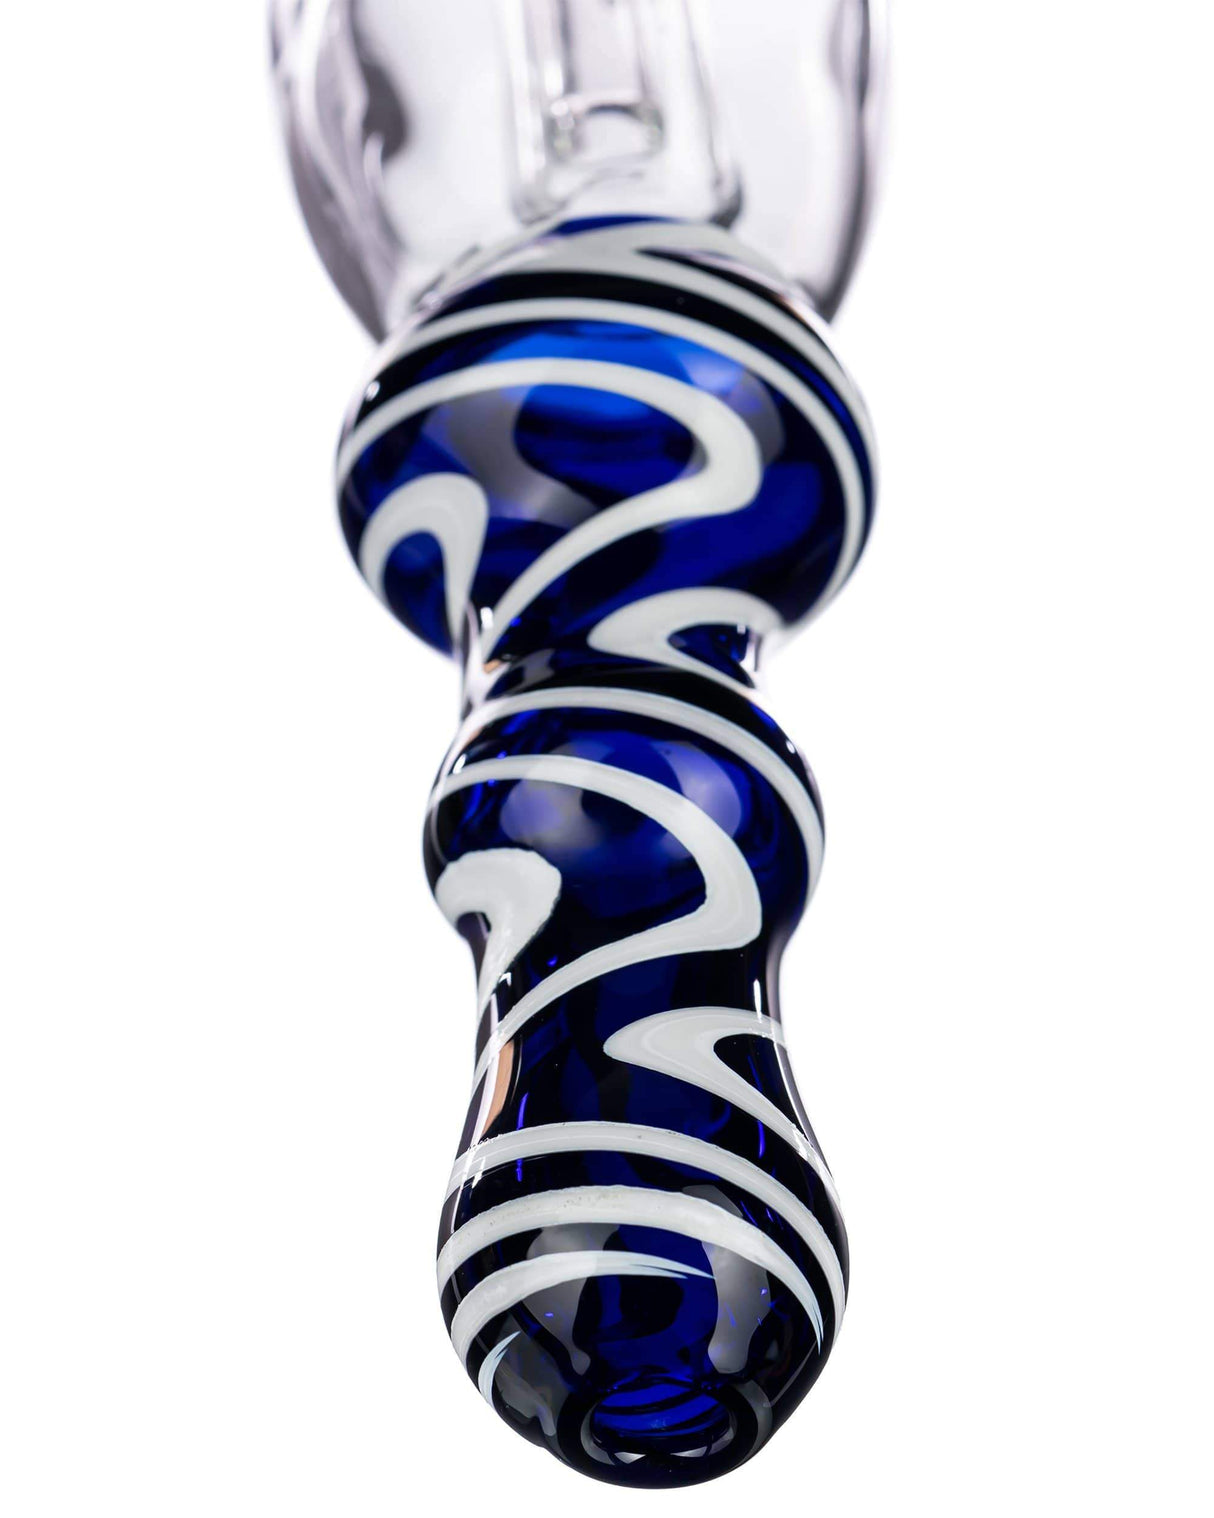 Close-up of Valiant Distribution Wig Wag Glass Nectar Collector with blue and white swirl design